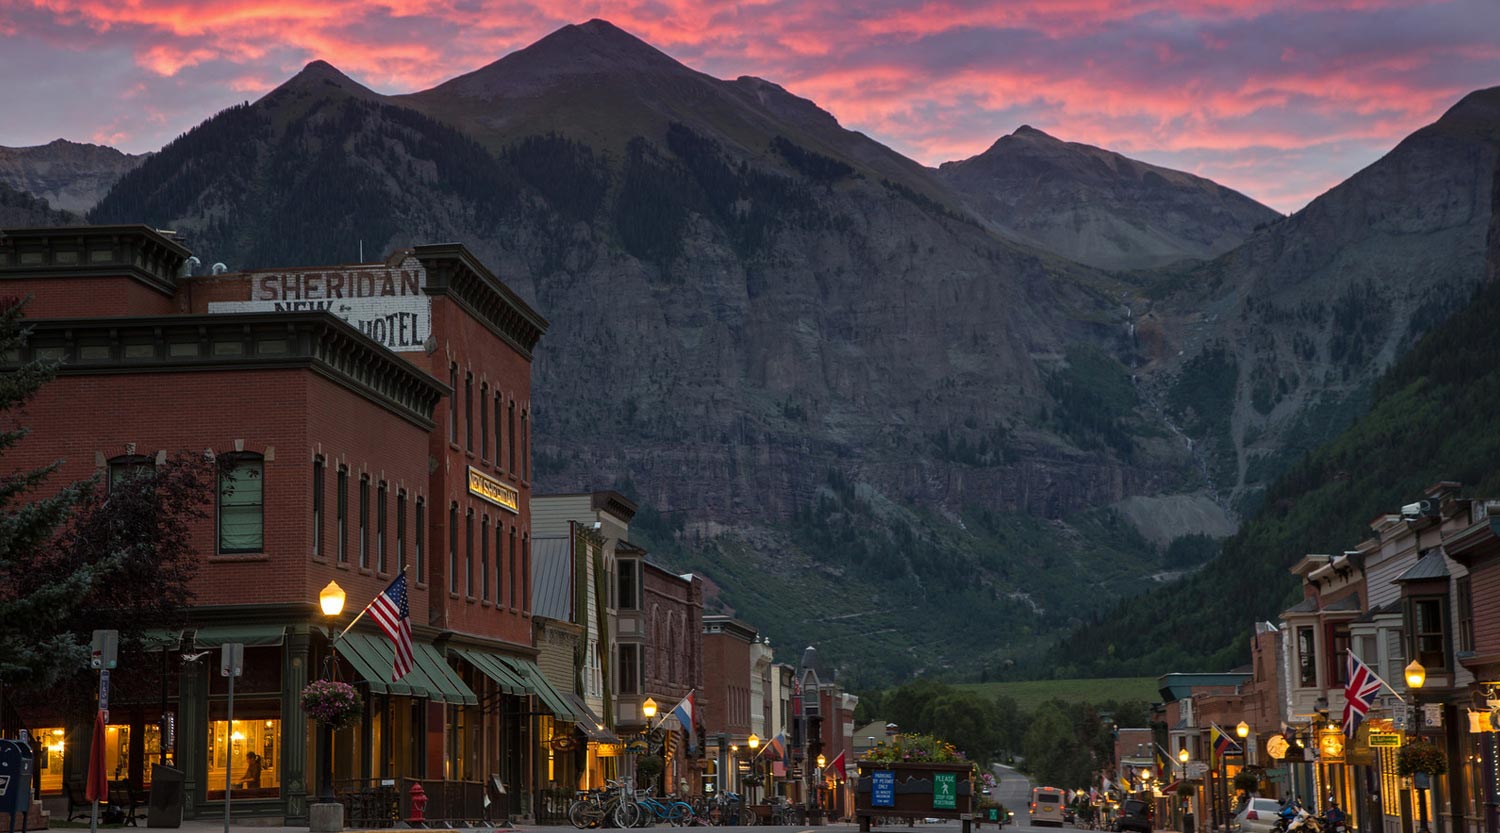 Downtown Telluride at Sunset